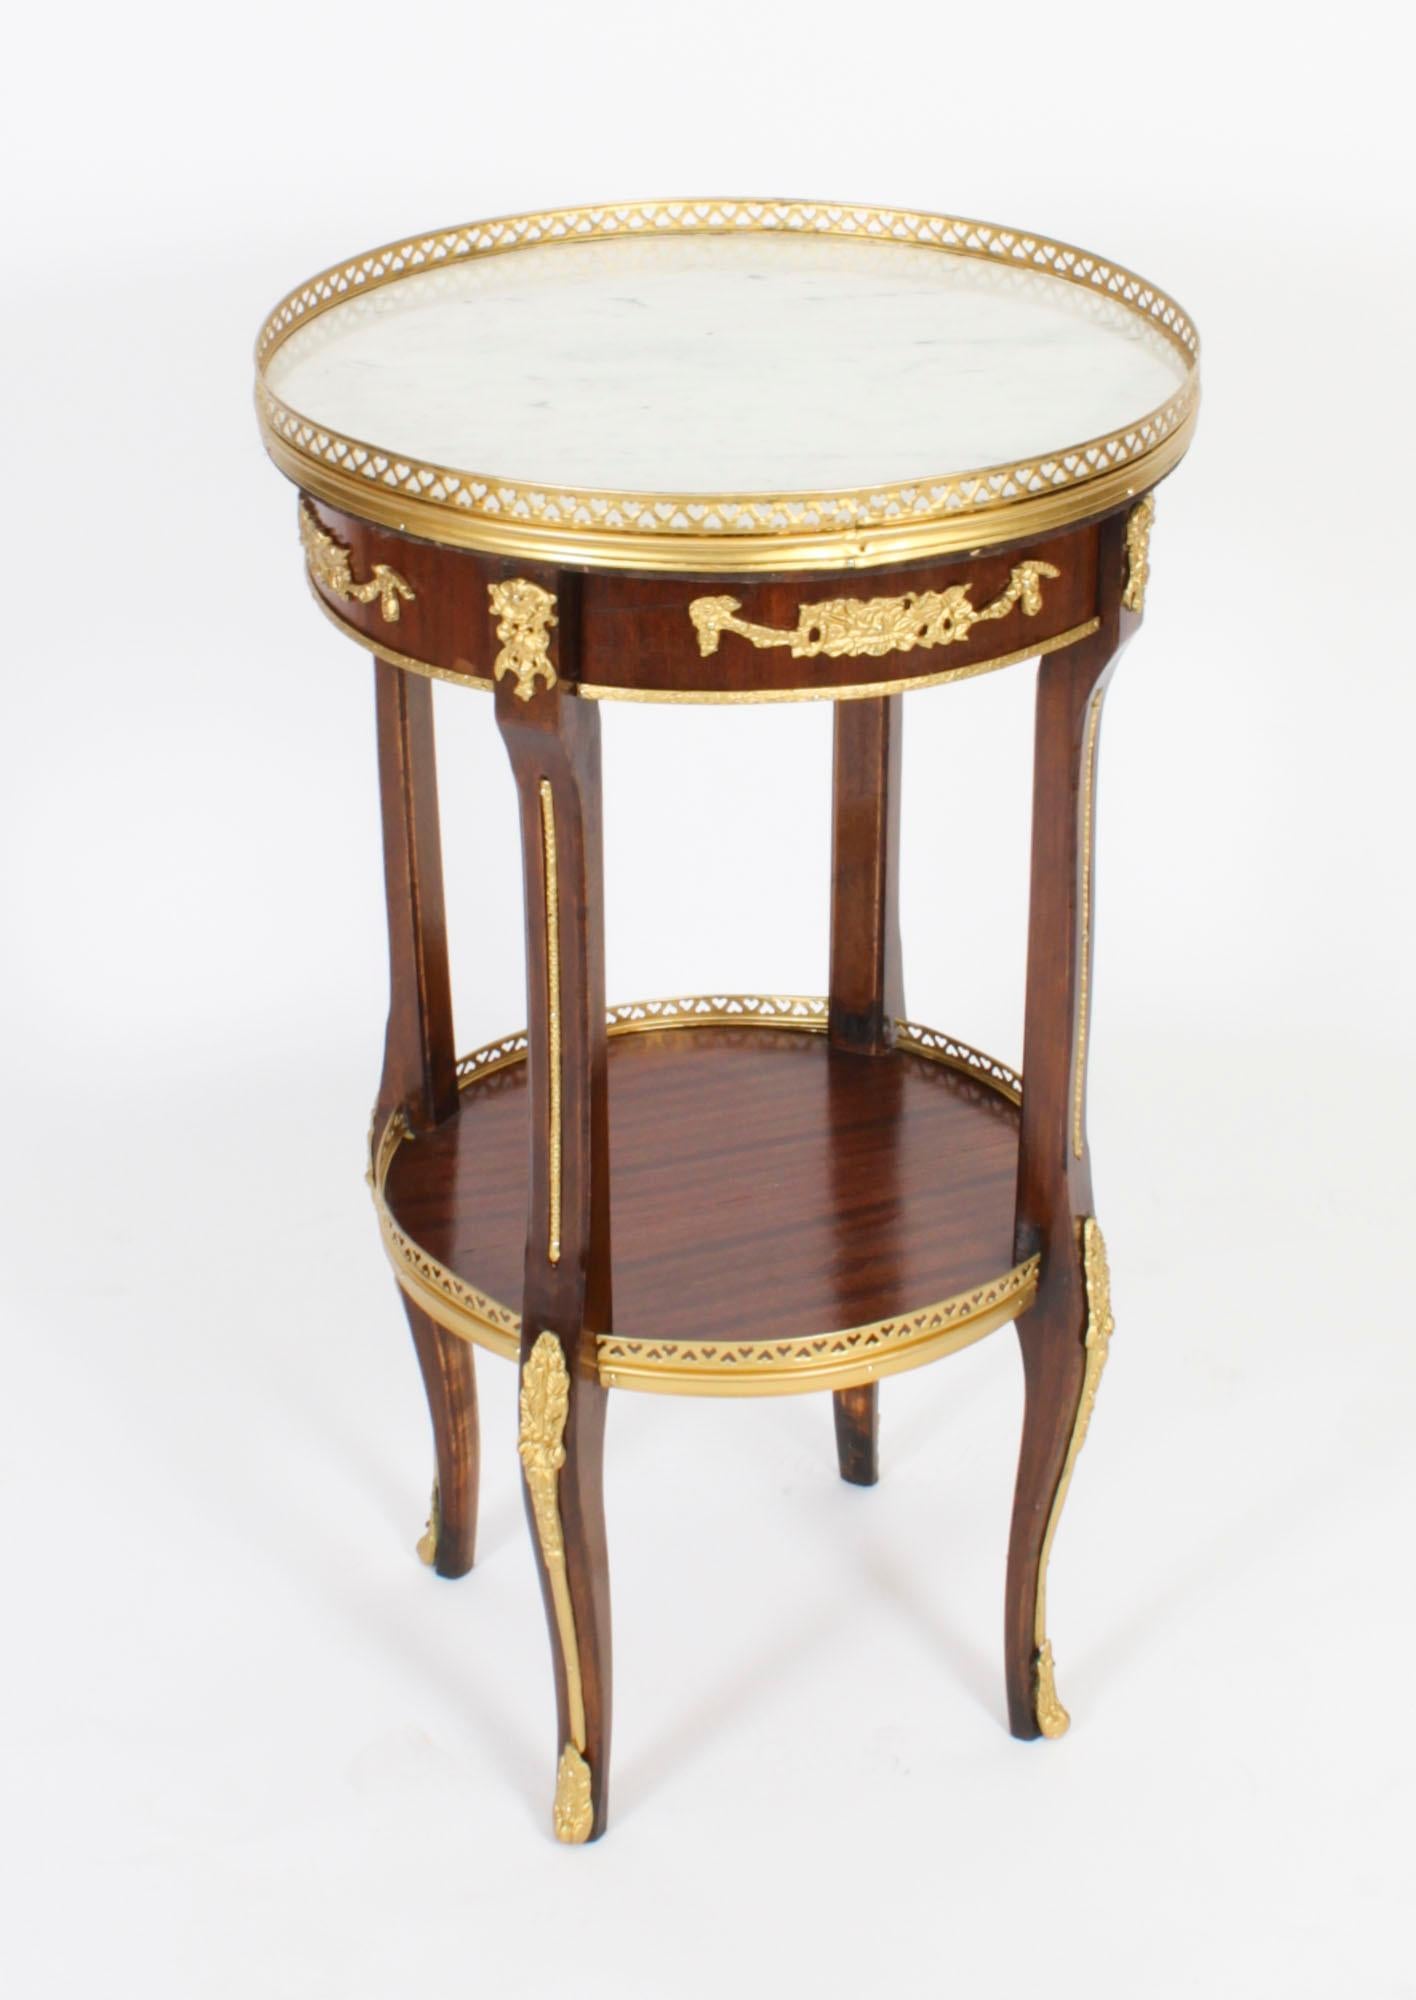 Empire Revival Antique French Empire Marble & Ormolu Occasional Table, 19th Century For Sale